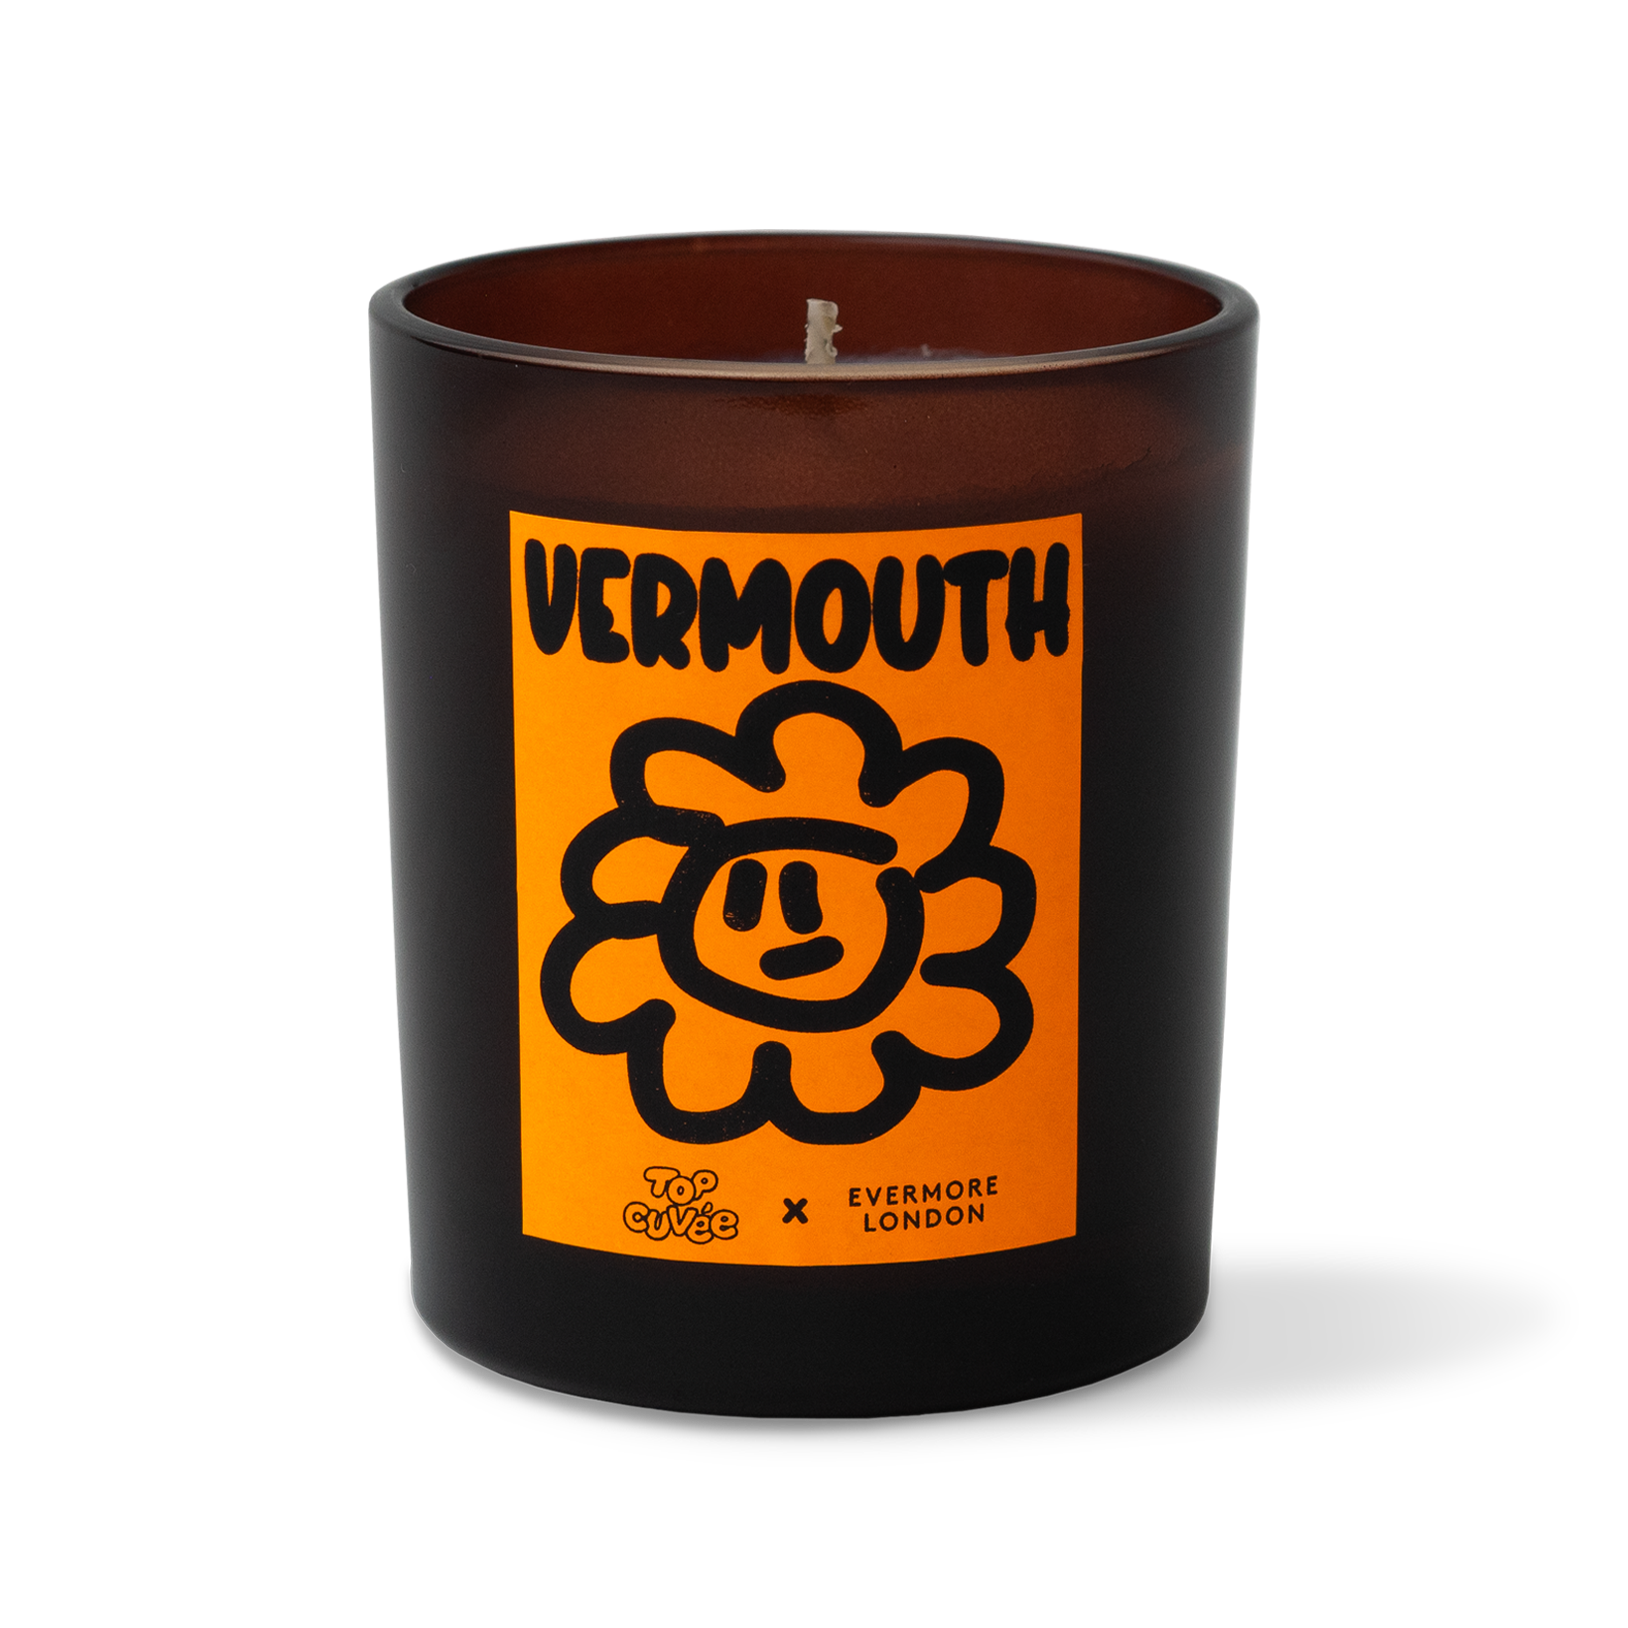 Evermore_TopCuvee_Vermouth_Candle_Front_2_54c744eb-e629-430c-9ba6-a9225ae2cf06.png